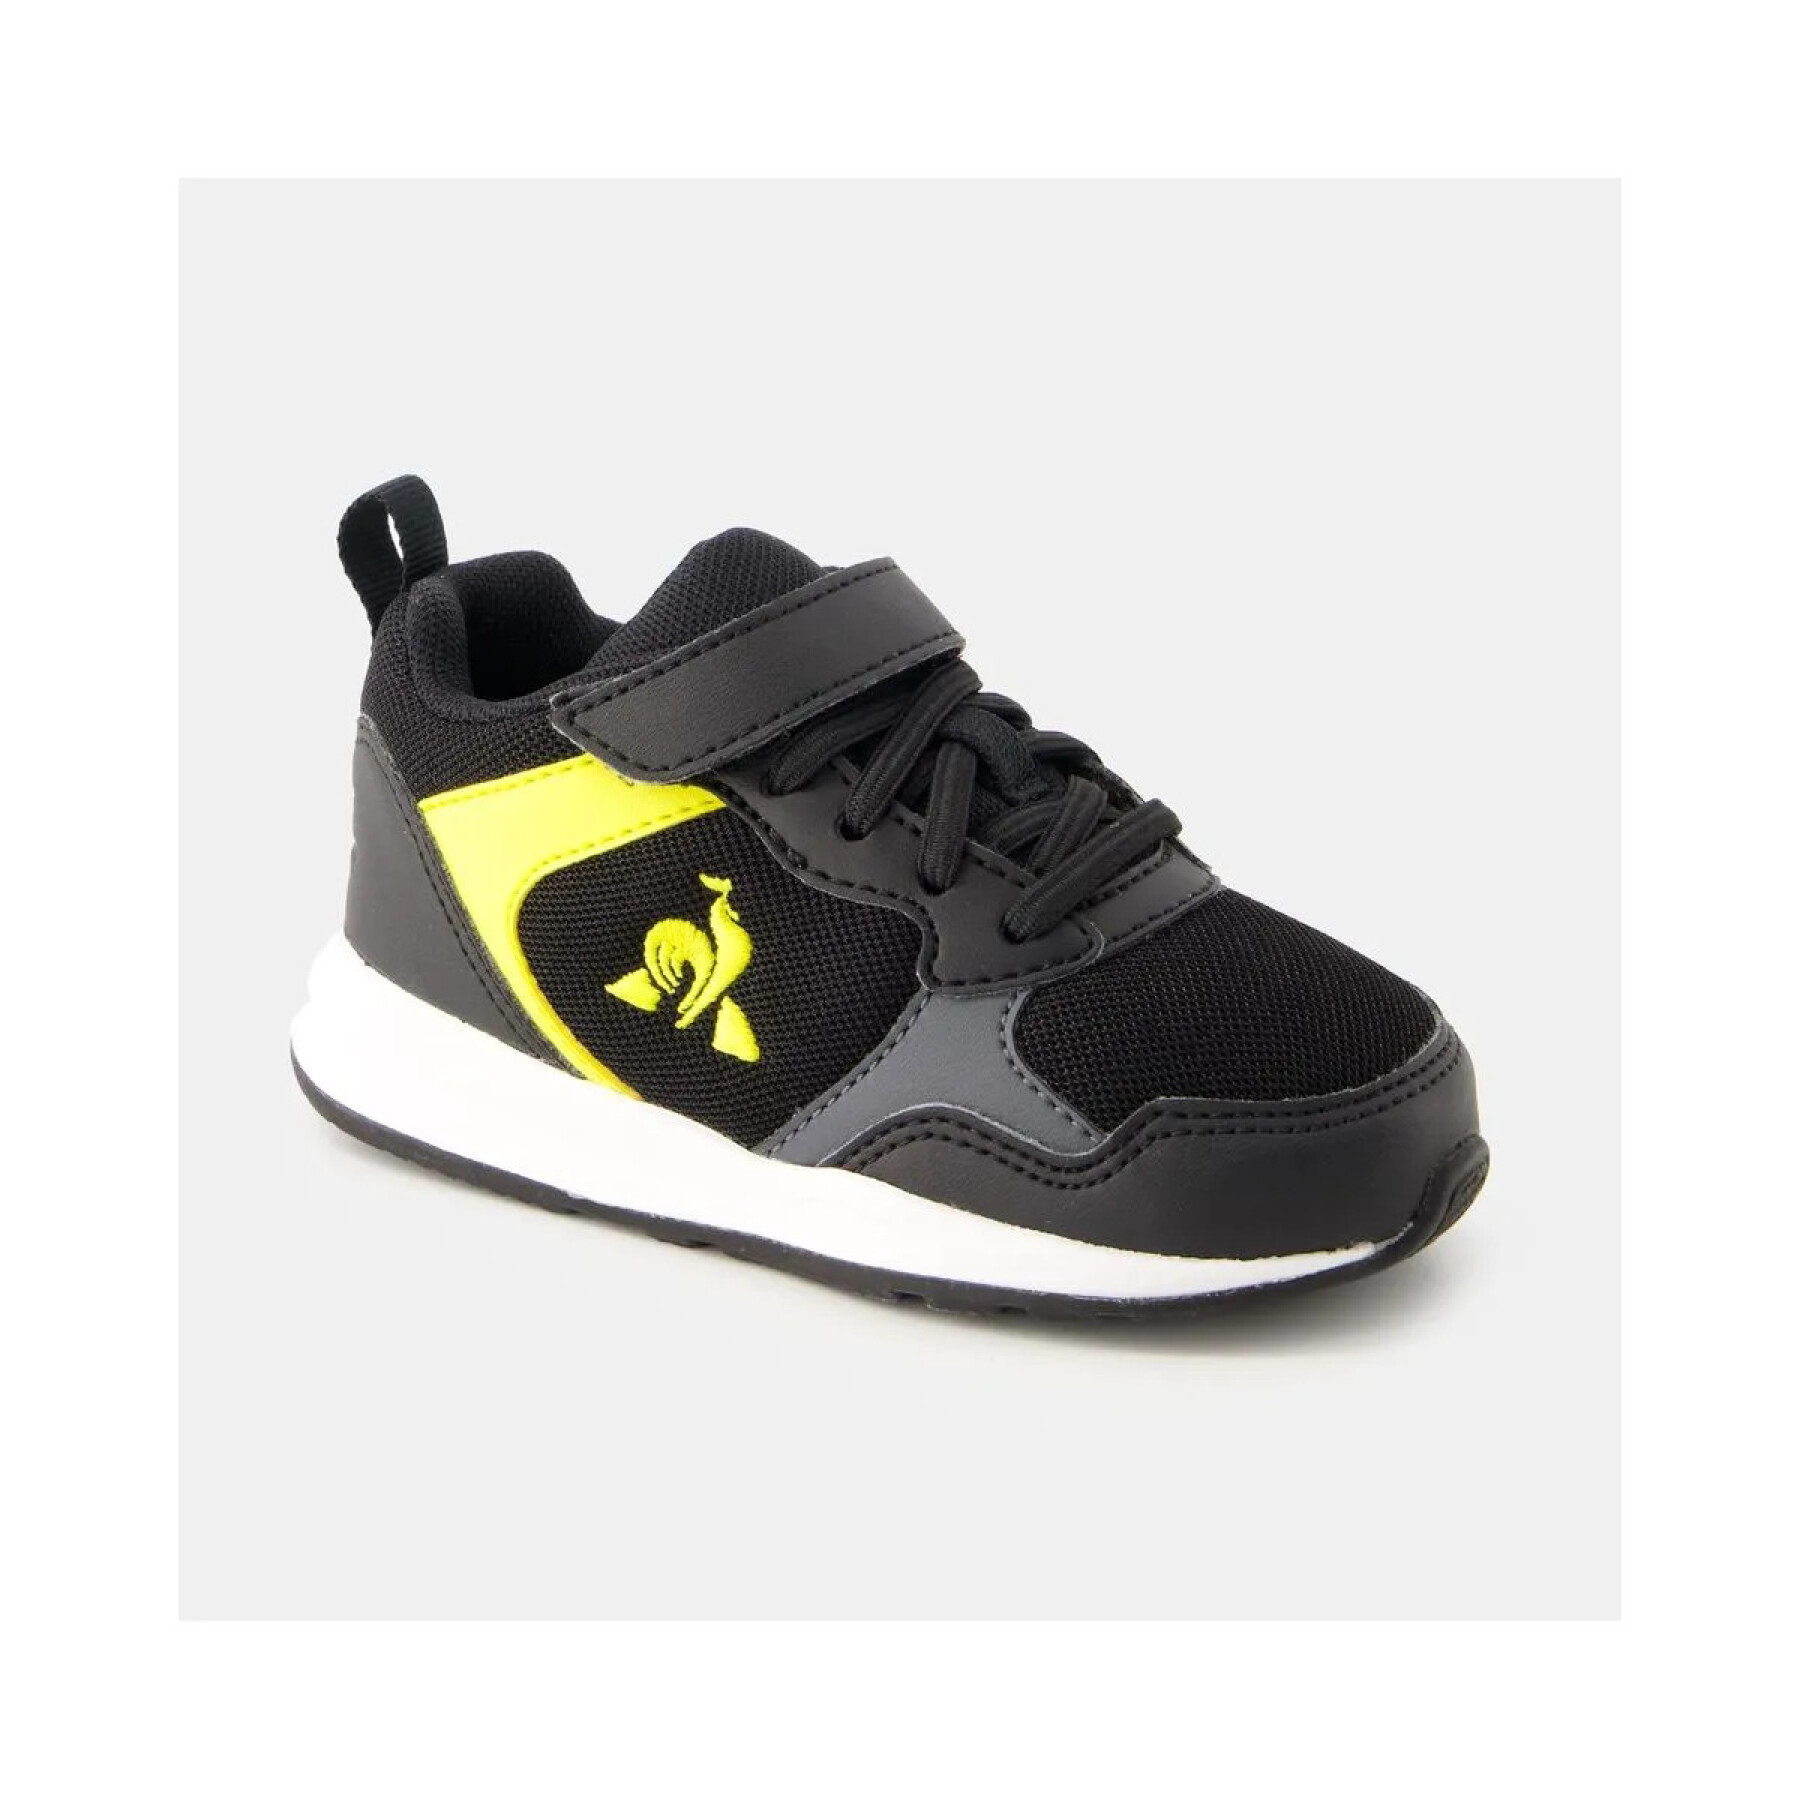 Babytrainers Le Coq Sportif R500 INF